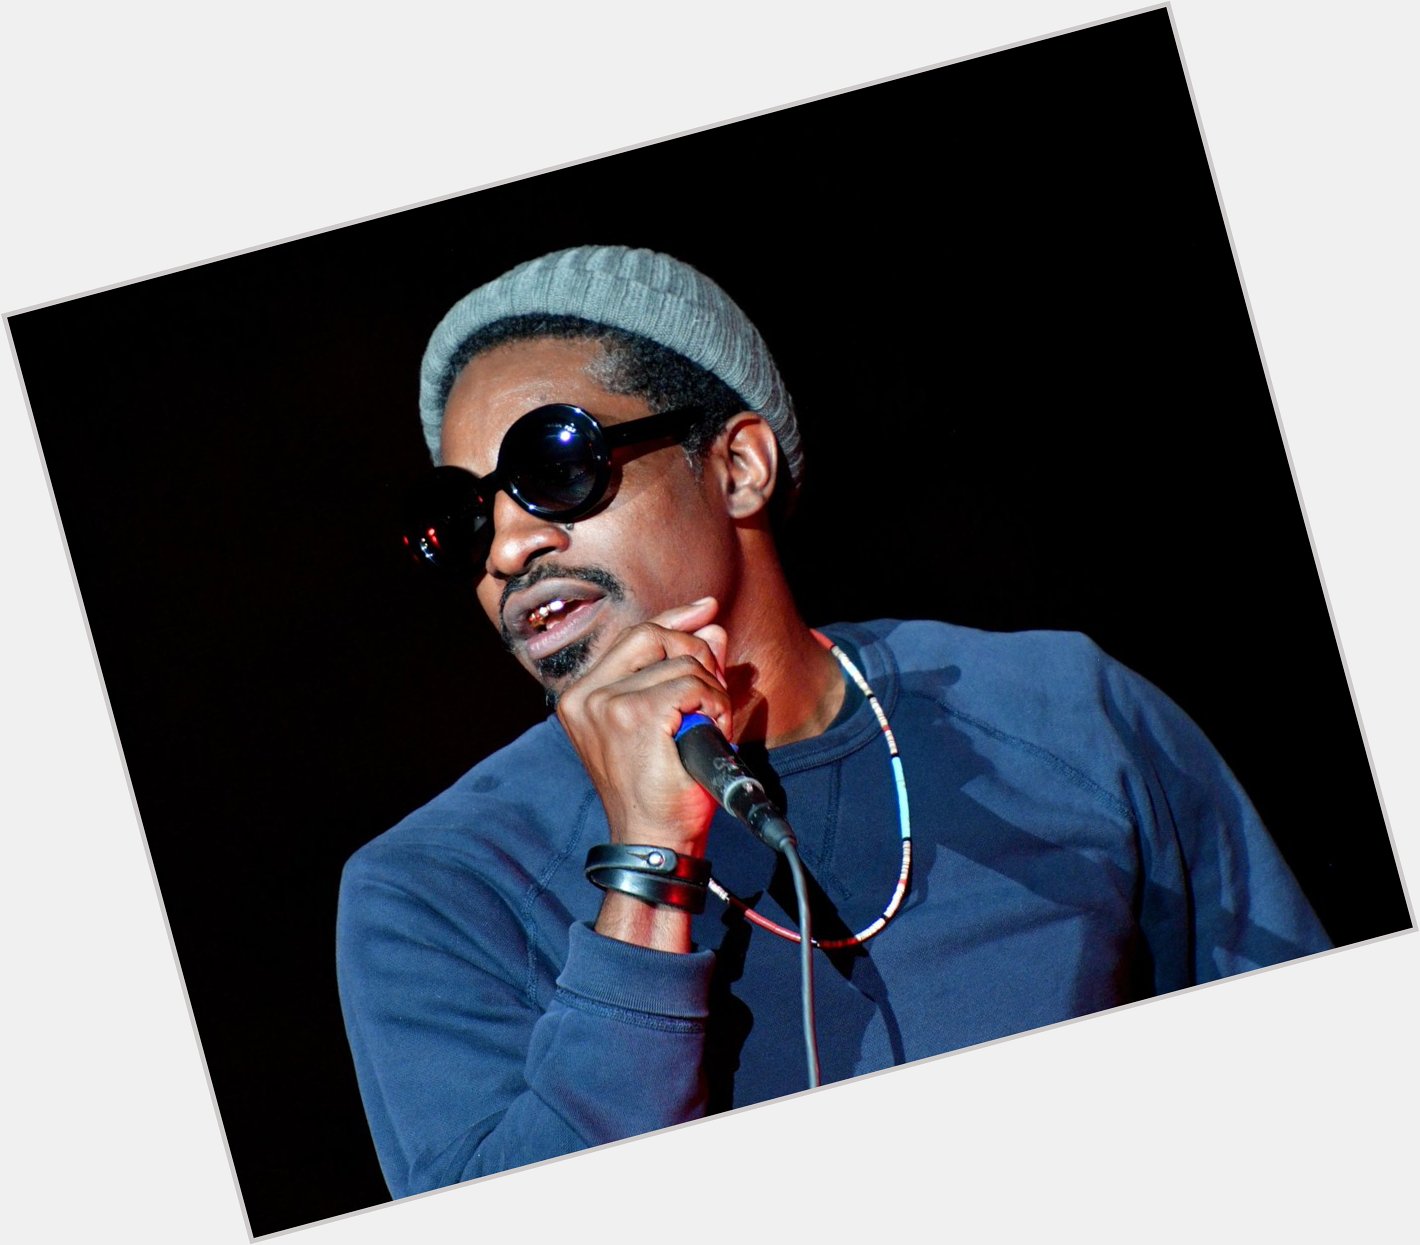 HAPPY BIRTHDAY BORN ON THIS DAY May 27 André Lauren Benjamin (A.K.A ) André 3000 